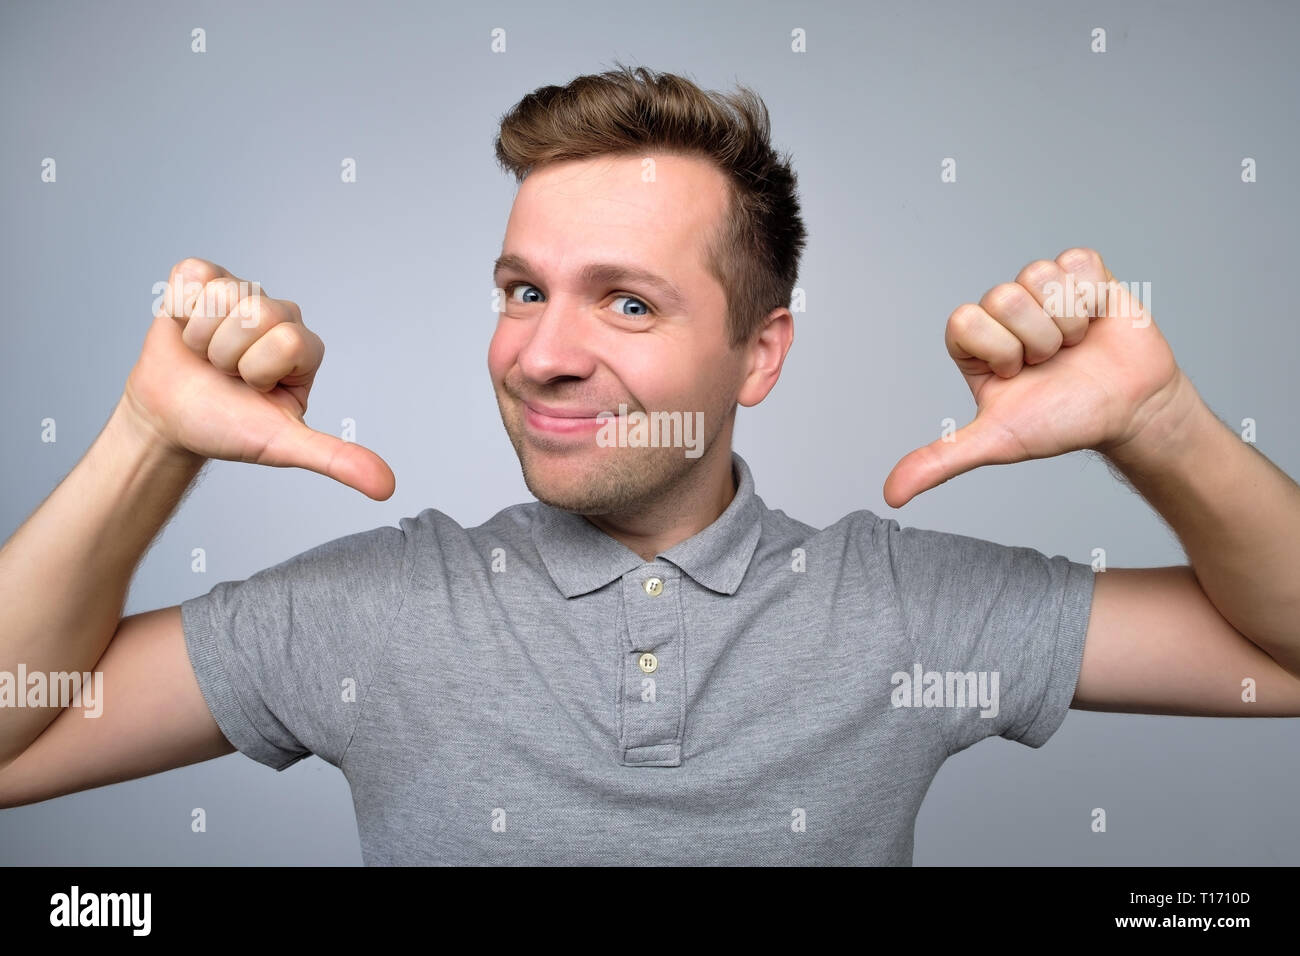 proud young man looks forward pointing at himself Stock Photo